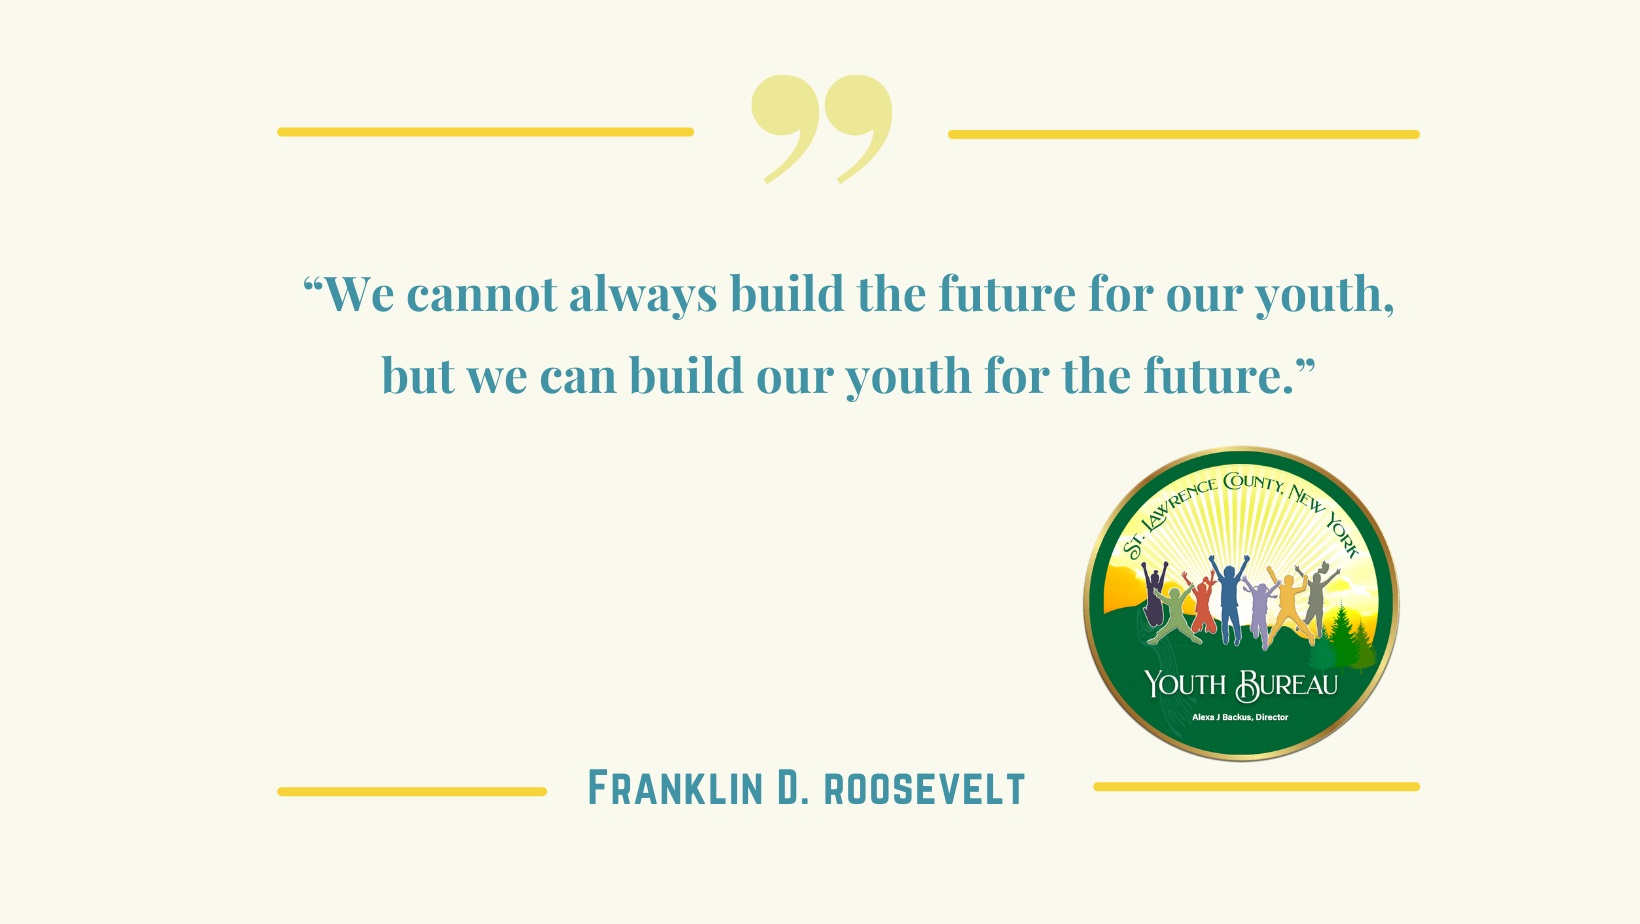 "We cannot always build the future for our youth, but we can build our youth for the future." - Franklin D. Roosevelt